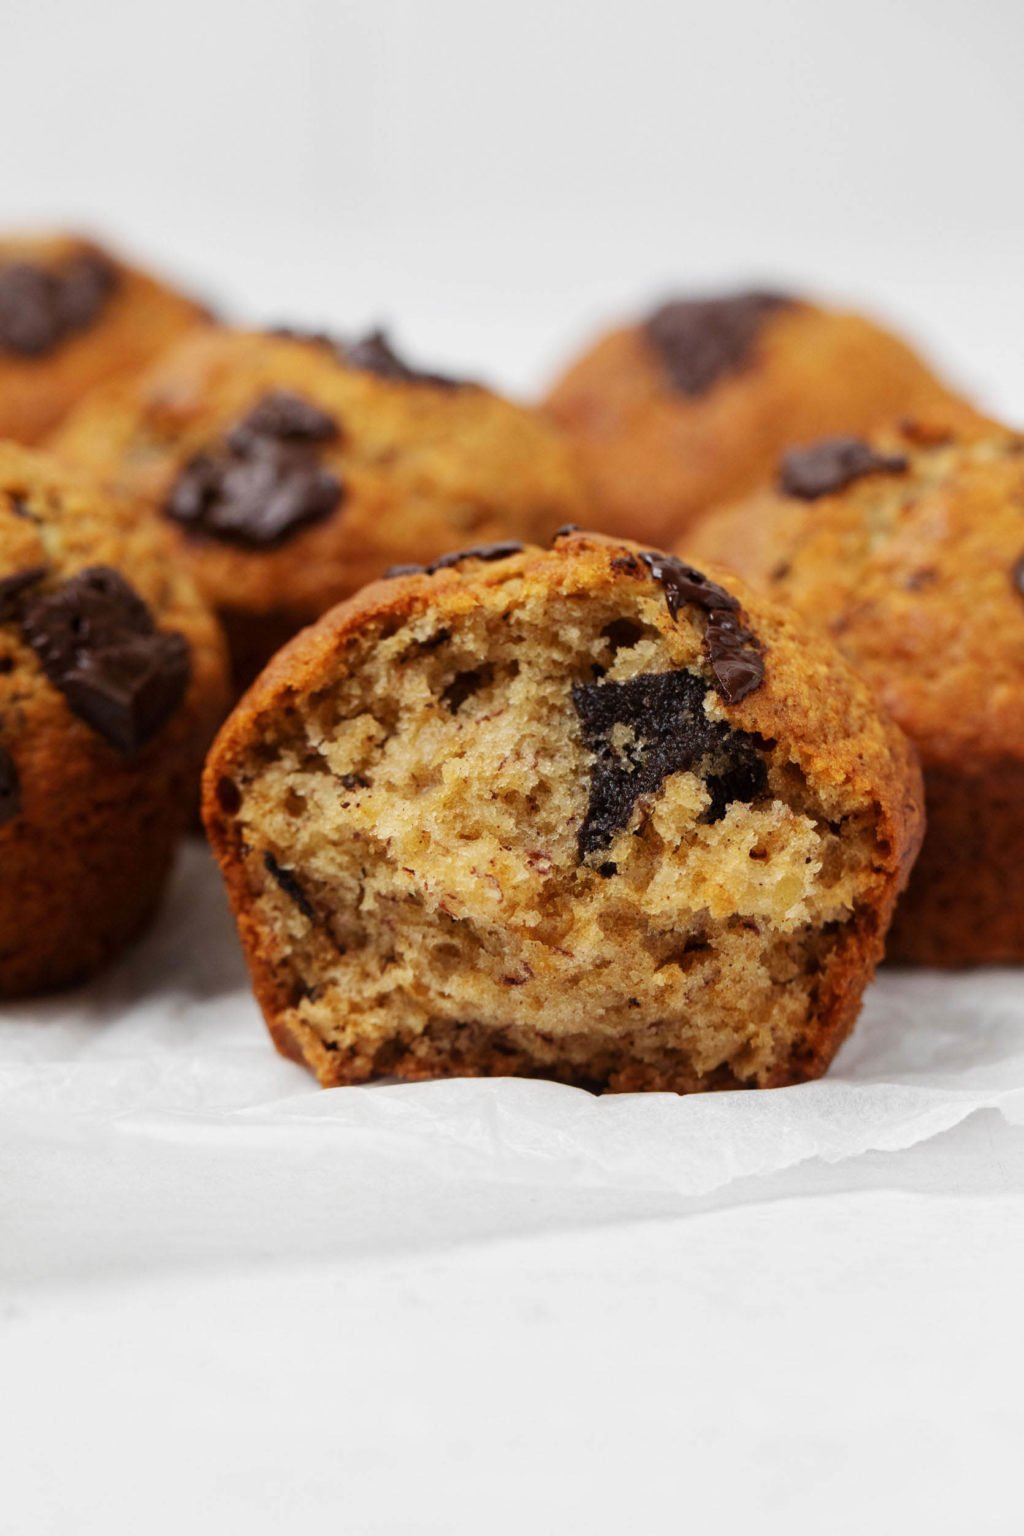 A vegan banana chocolate chip muffin has been broken apart, revealing a soft interior within.